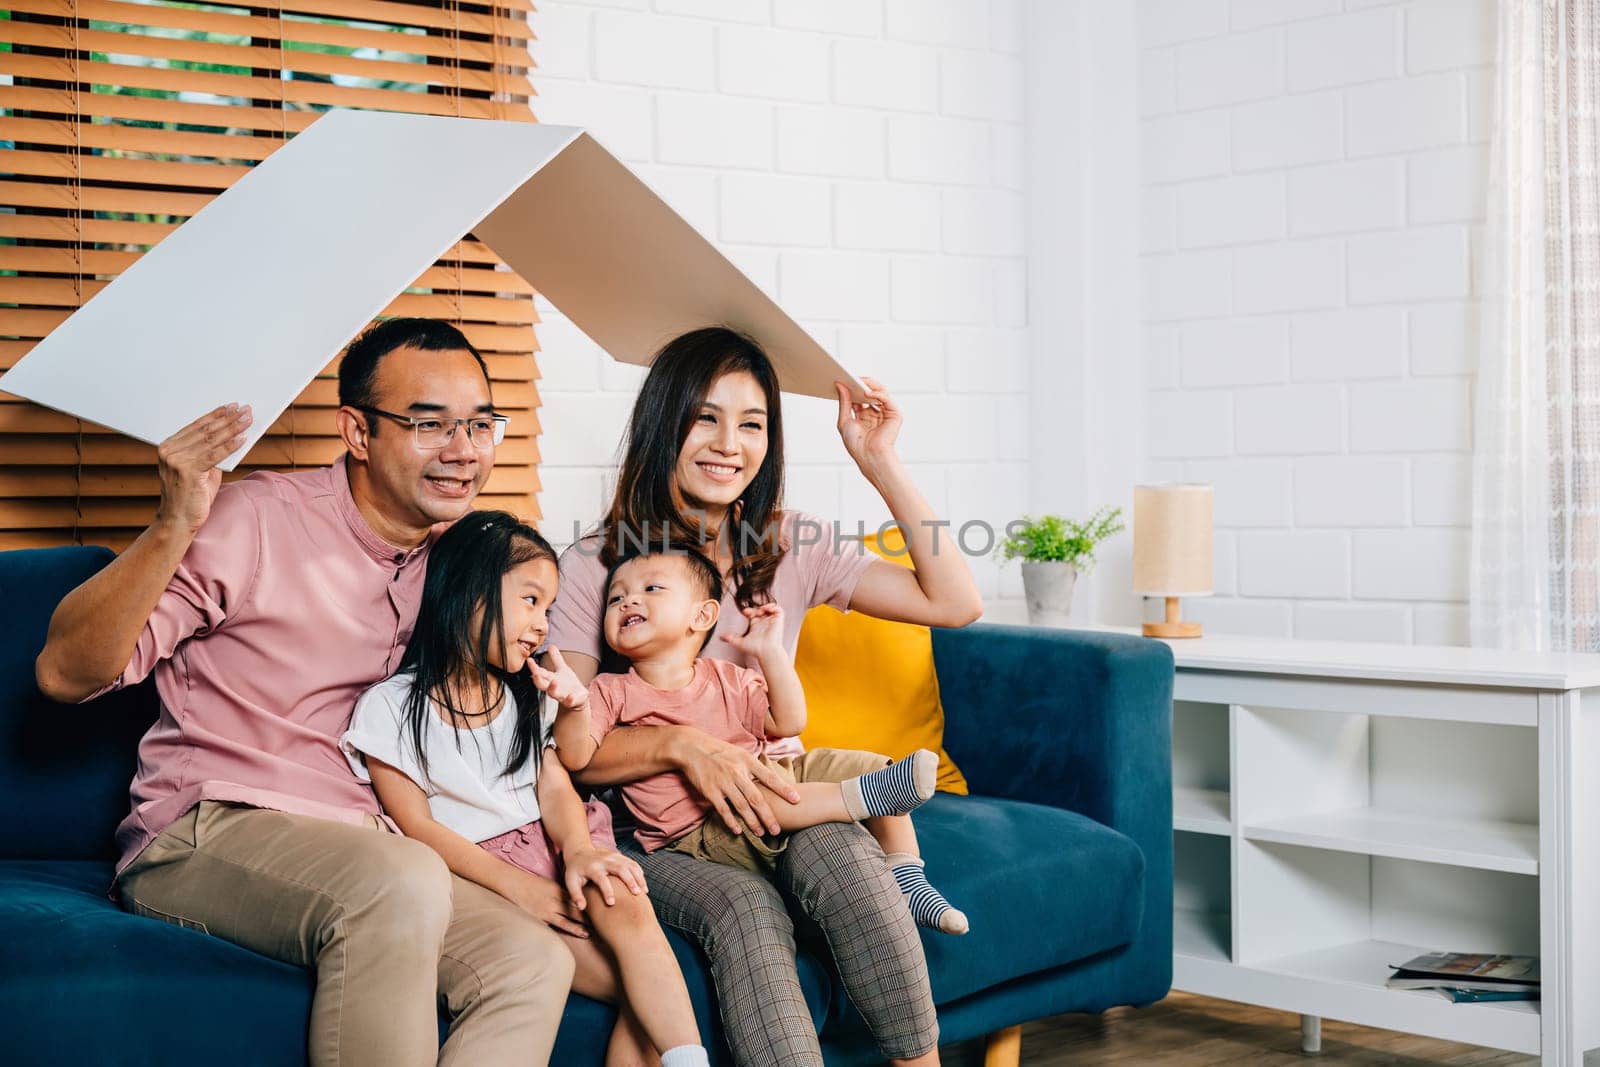 Concept of housing and relocation takes shape with happy family mother father and kids holding cardboard roof on sofa by Sorapop